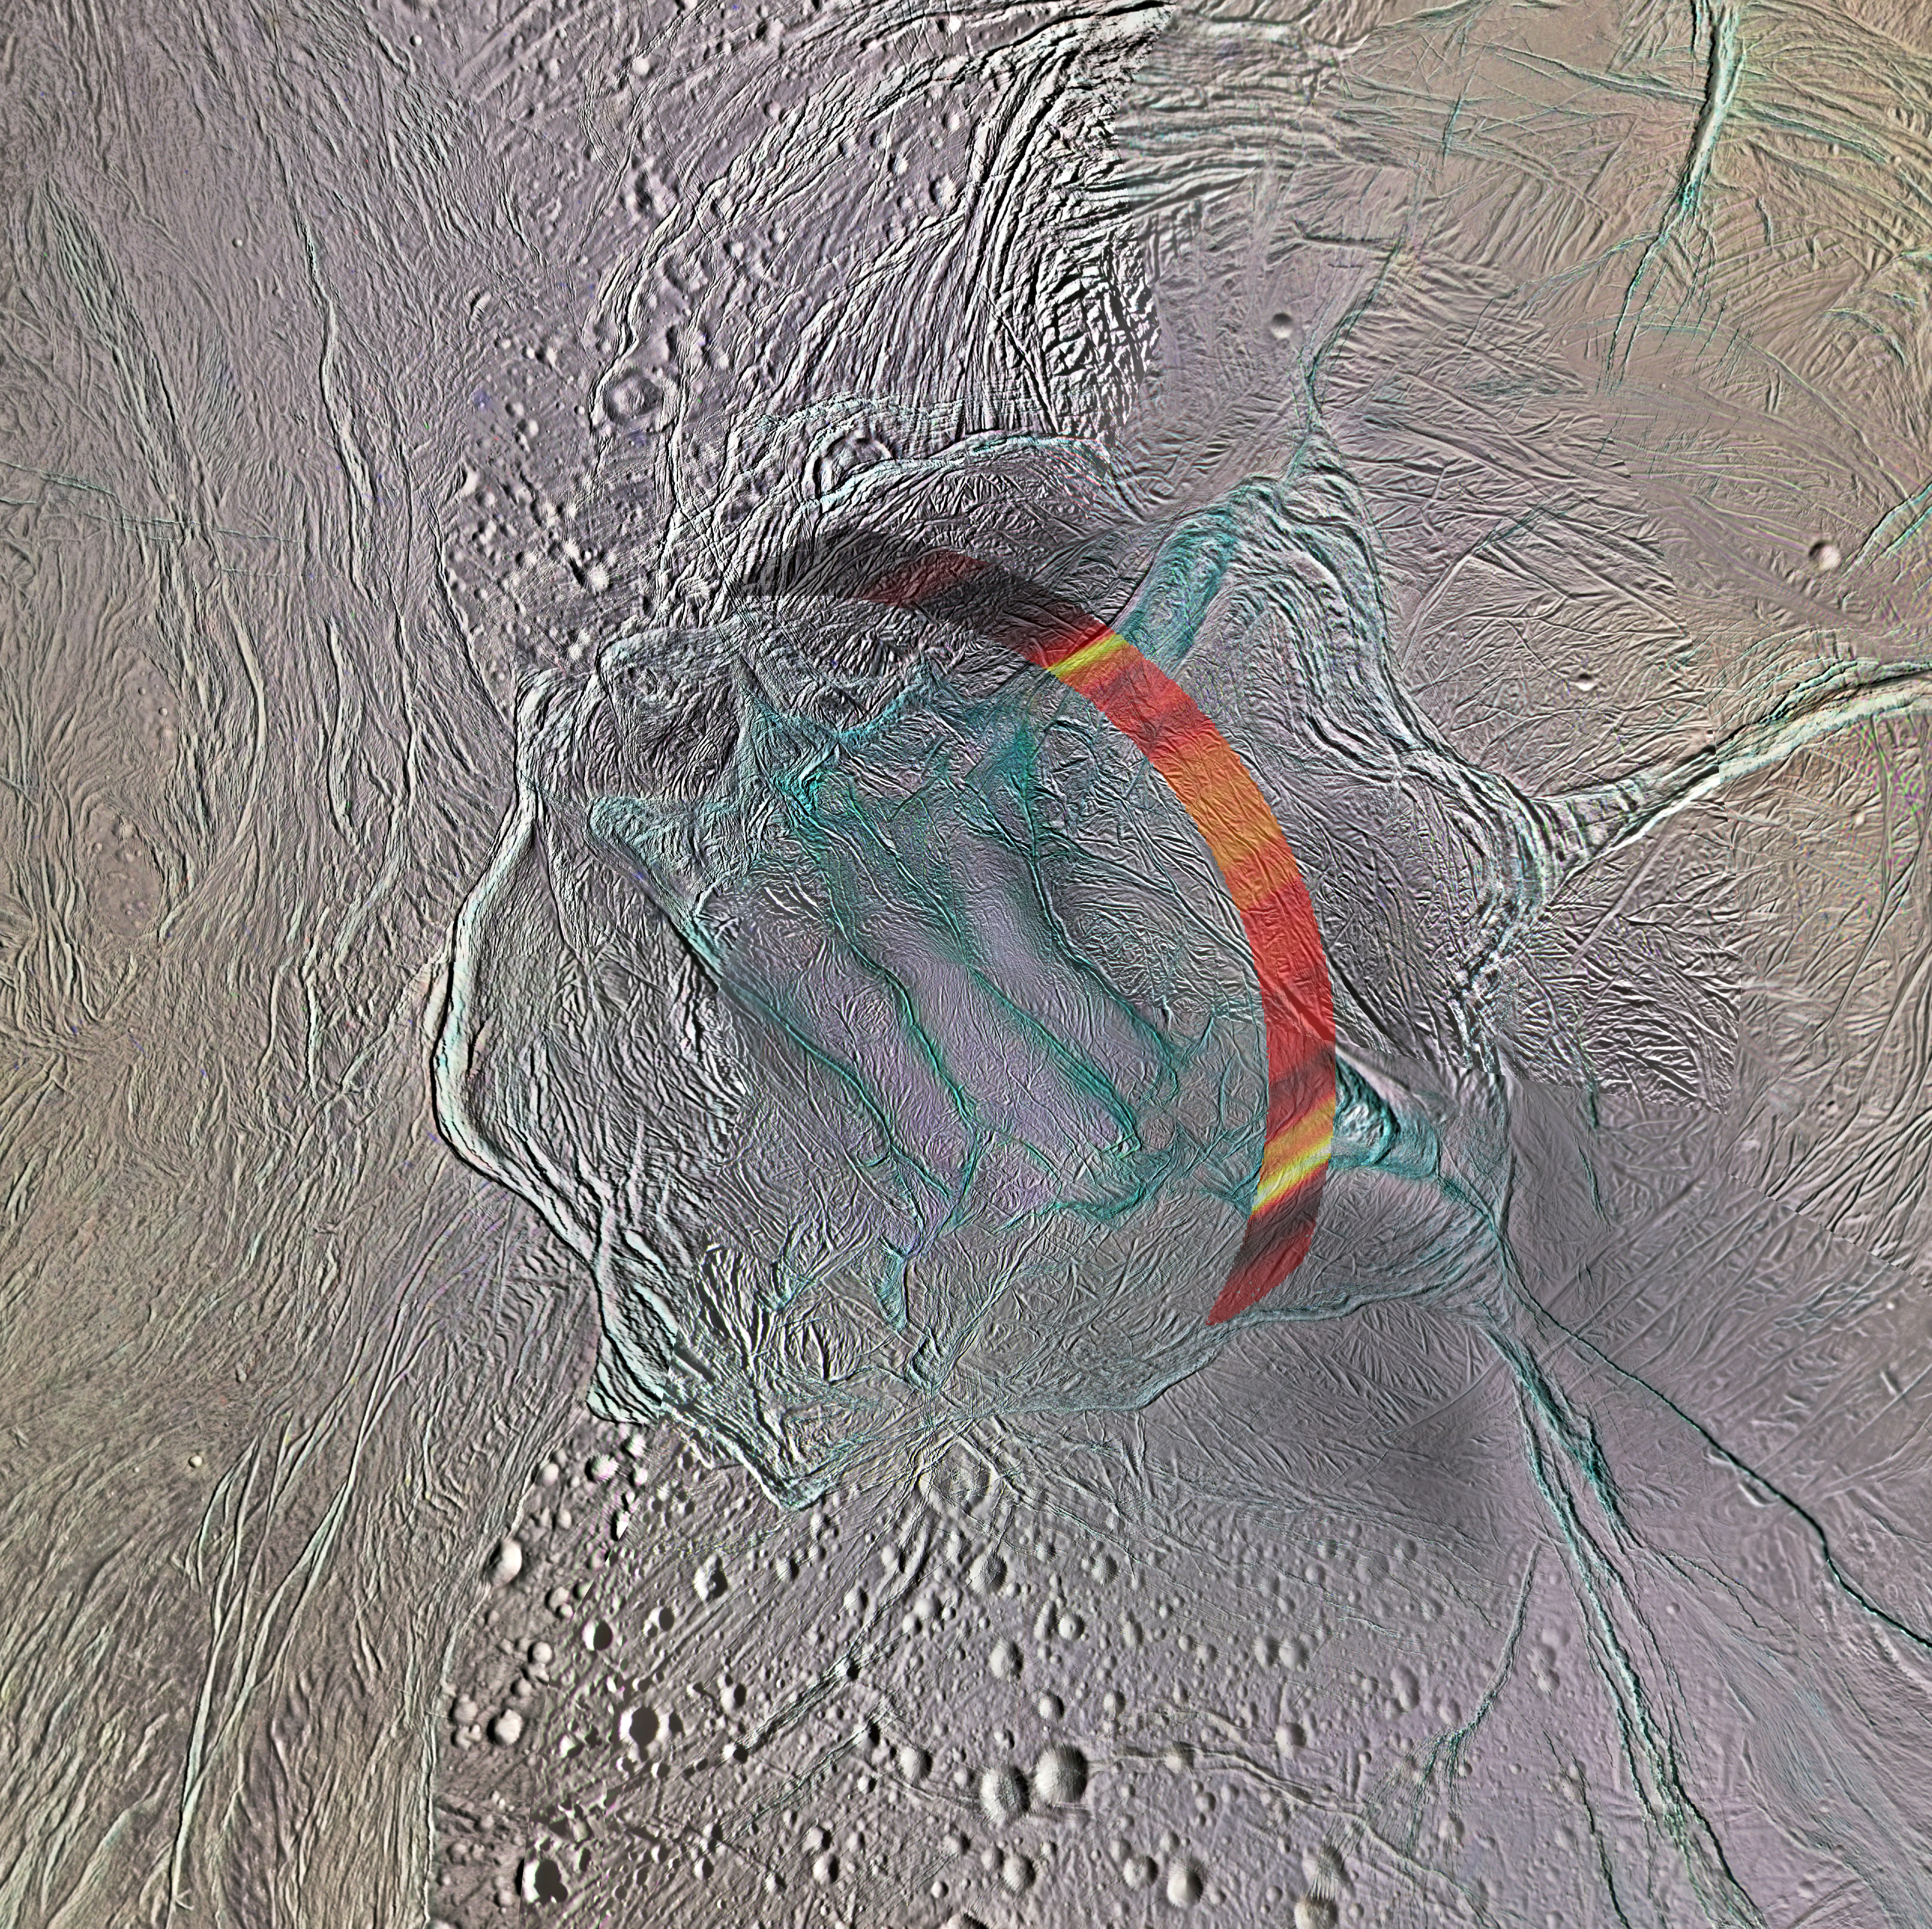 Color image with data overlay showing heat sources on Enceladus.